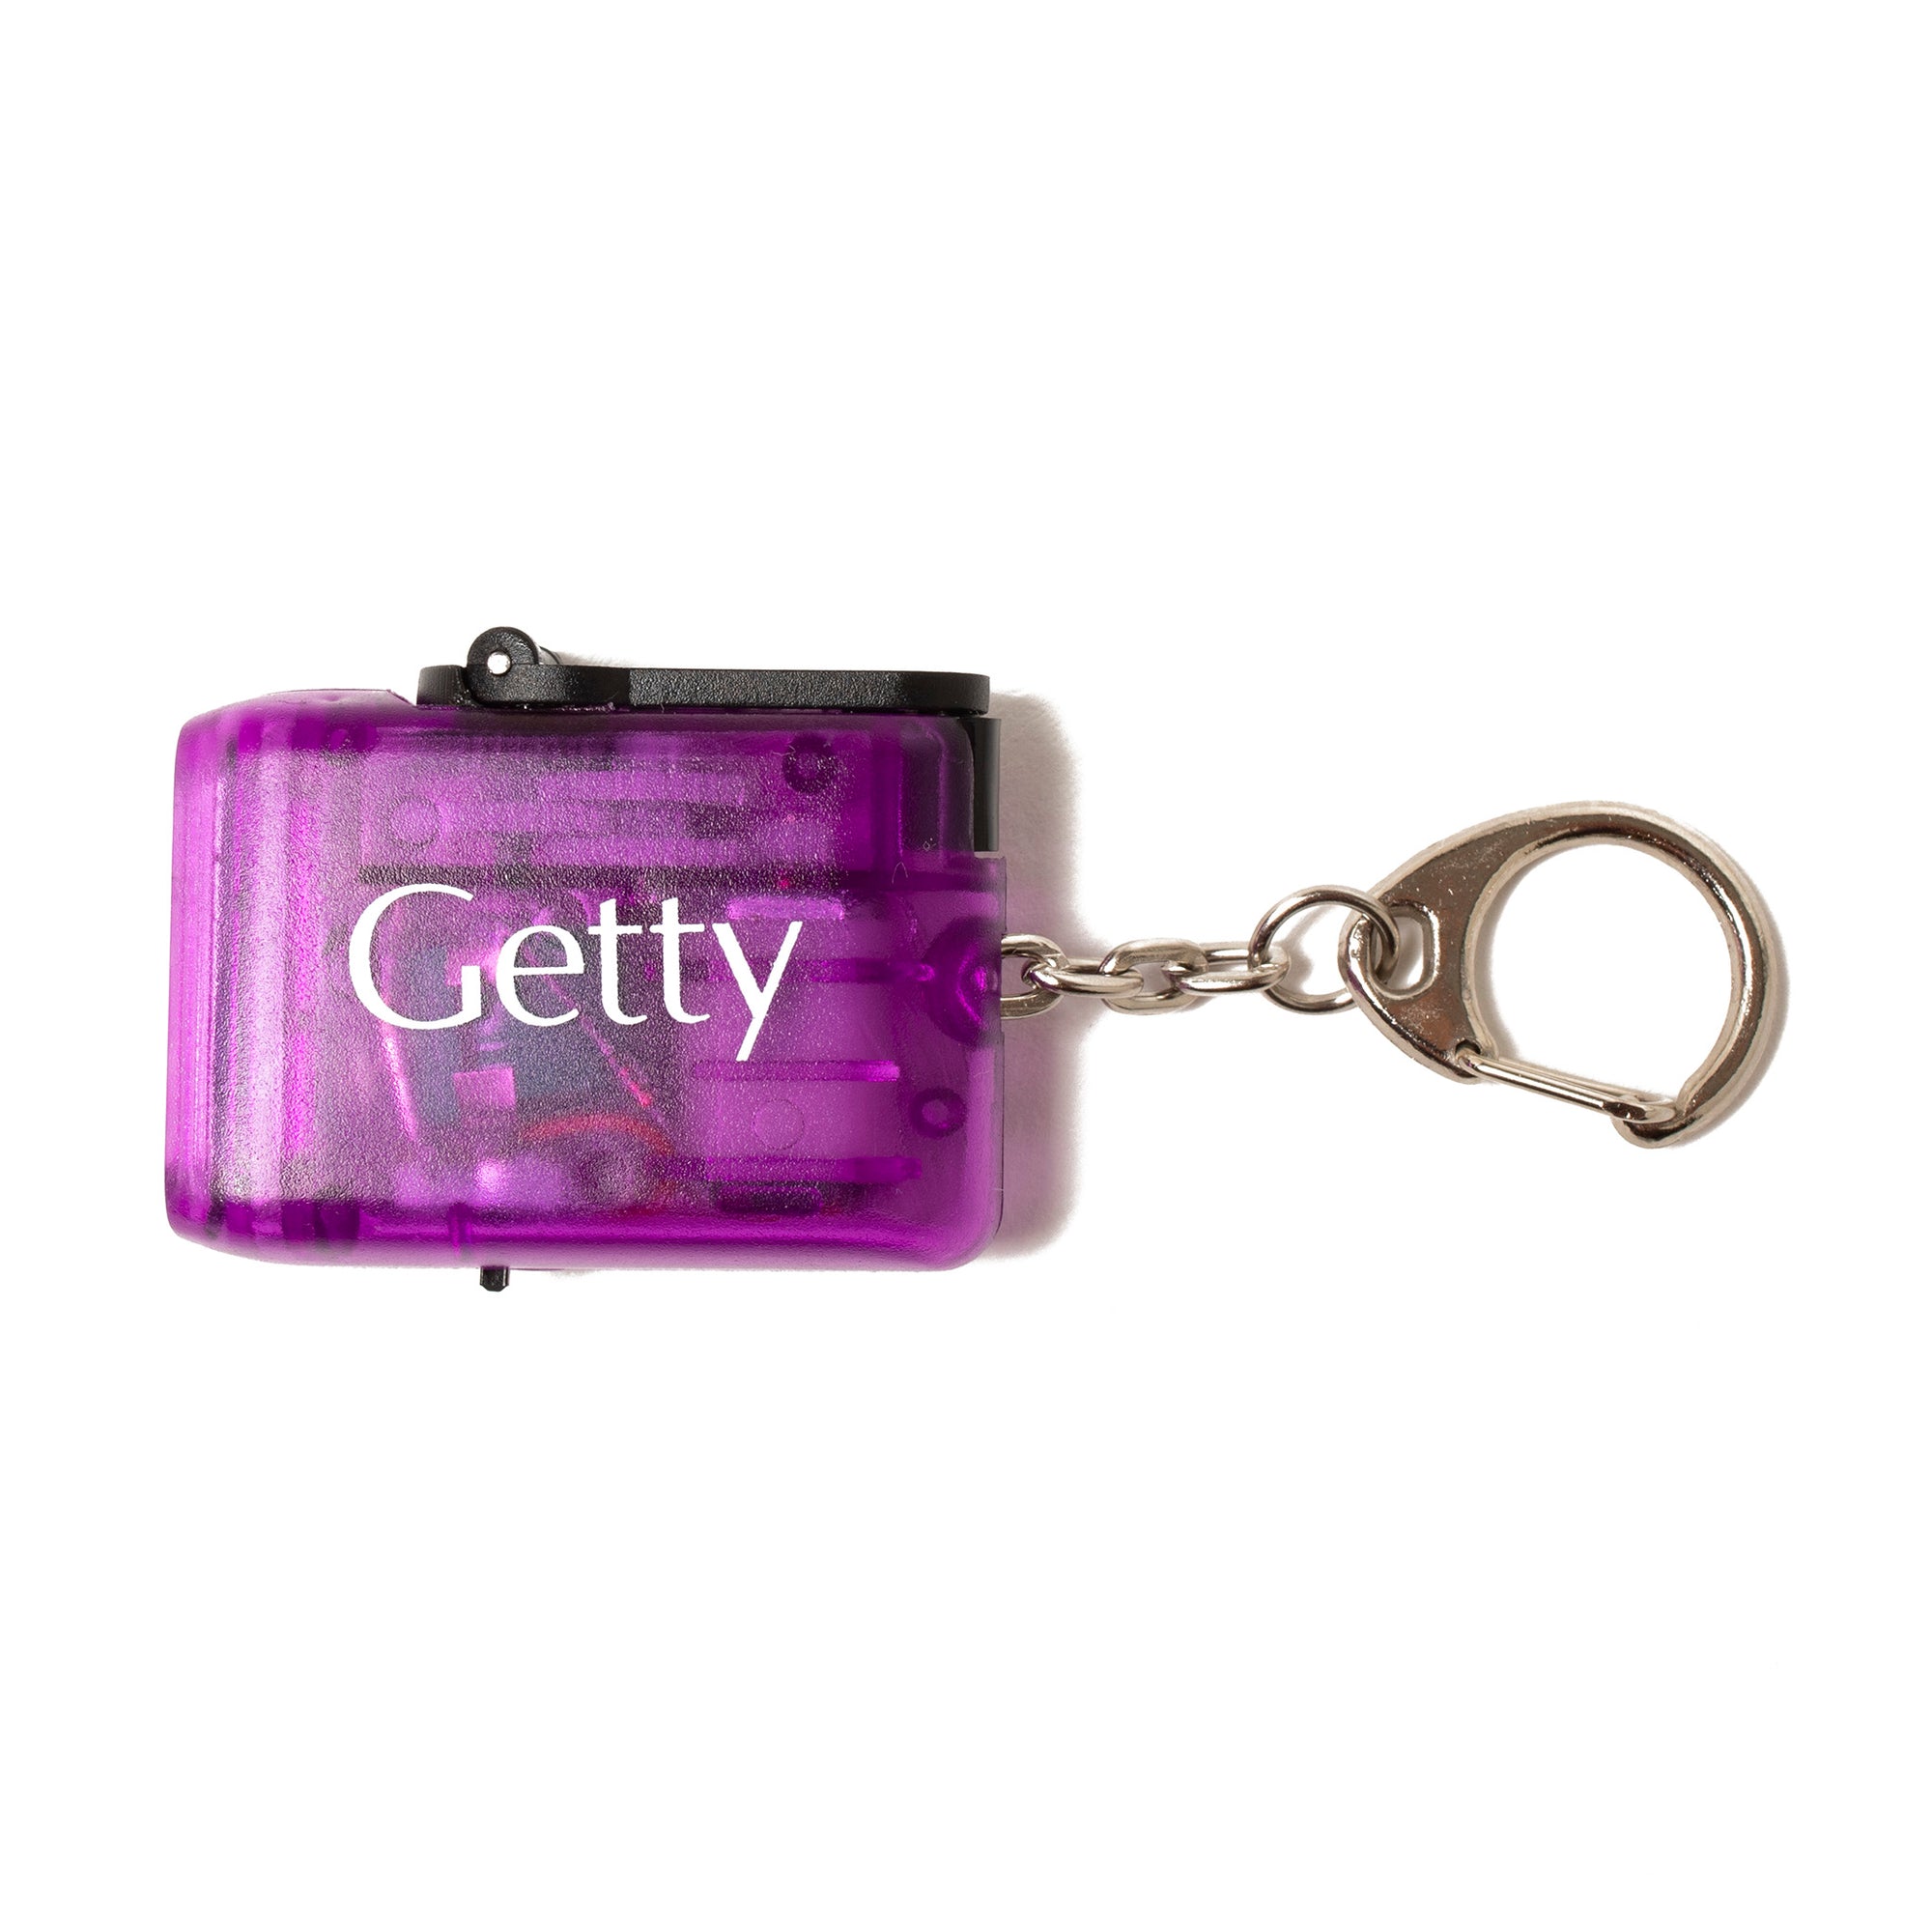 Getty Wallet Featuring Monet's Sunrise (Marine) by Gabs, Italy